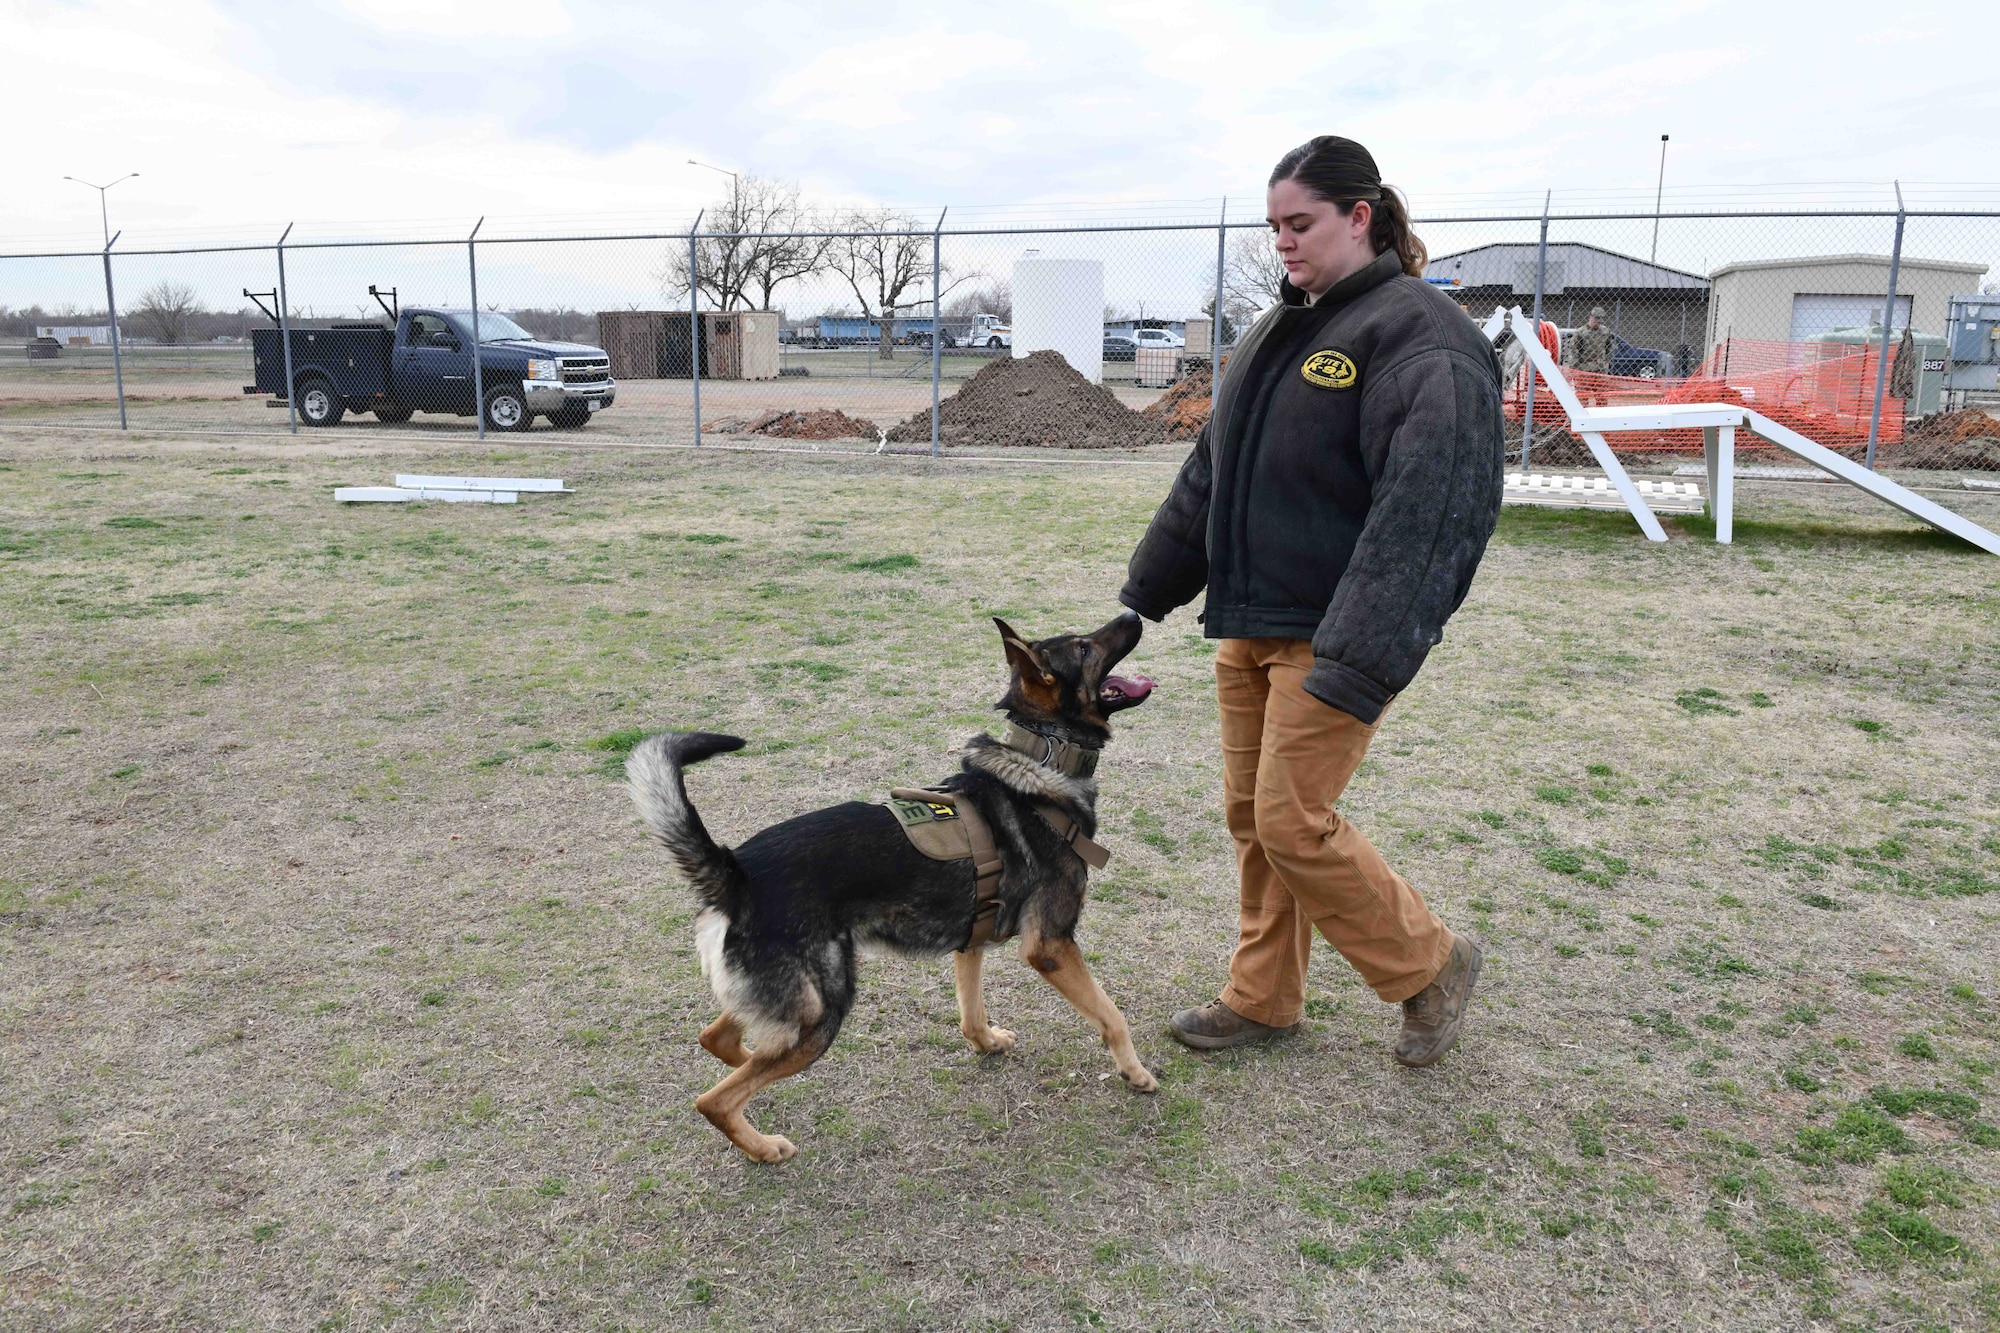 Bingo, 97th Security Forces Squadron (SFS) military working dog (MWD), escorts U.S. Air Force Senior Airman Kaitlynd Newland, 97th SFS MWD handler at Altus Air Force Base, Oklahoma, March 6, 2023. Military working dogs are trained for many purposes such as tracking, attacking, detecting explosives and search and rescue missions. (U.S. Air Force photo by Airman 1st Class Miyah Gray)